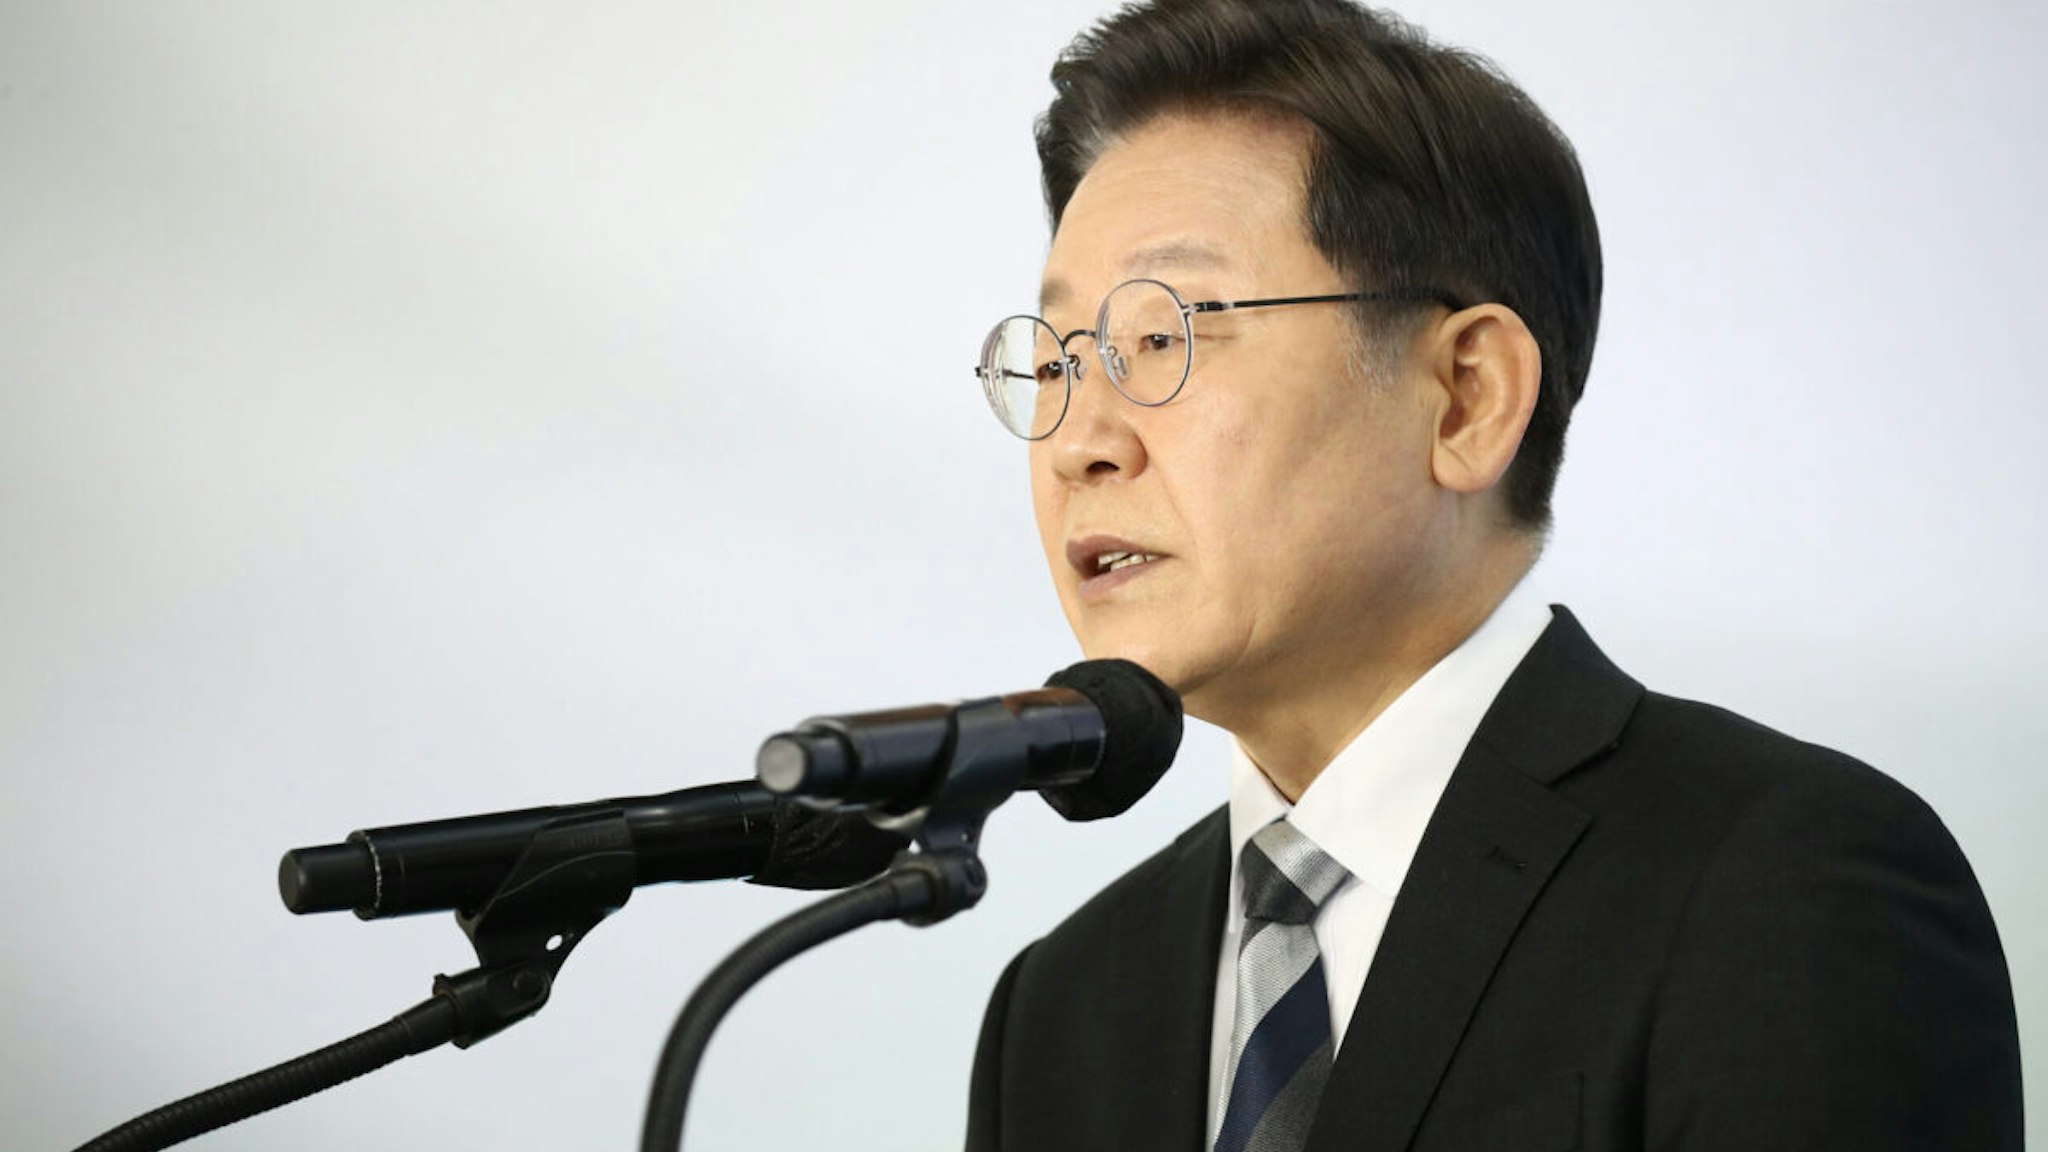 GYEONGGI-DO, SOUTH KOREA - JANUARY 04: Lee Jae-myung, presidential candidate of the ruling Democratic Party, speaks during a news conference at the KIA Motors plant on January 04, 2022 in Gyeonggi-Do, South Korea. Lee has ranked top in all polling results this year, as South Korea has just over 64 days left until the March election.